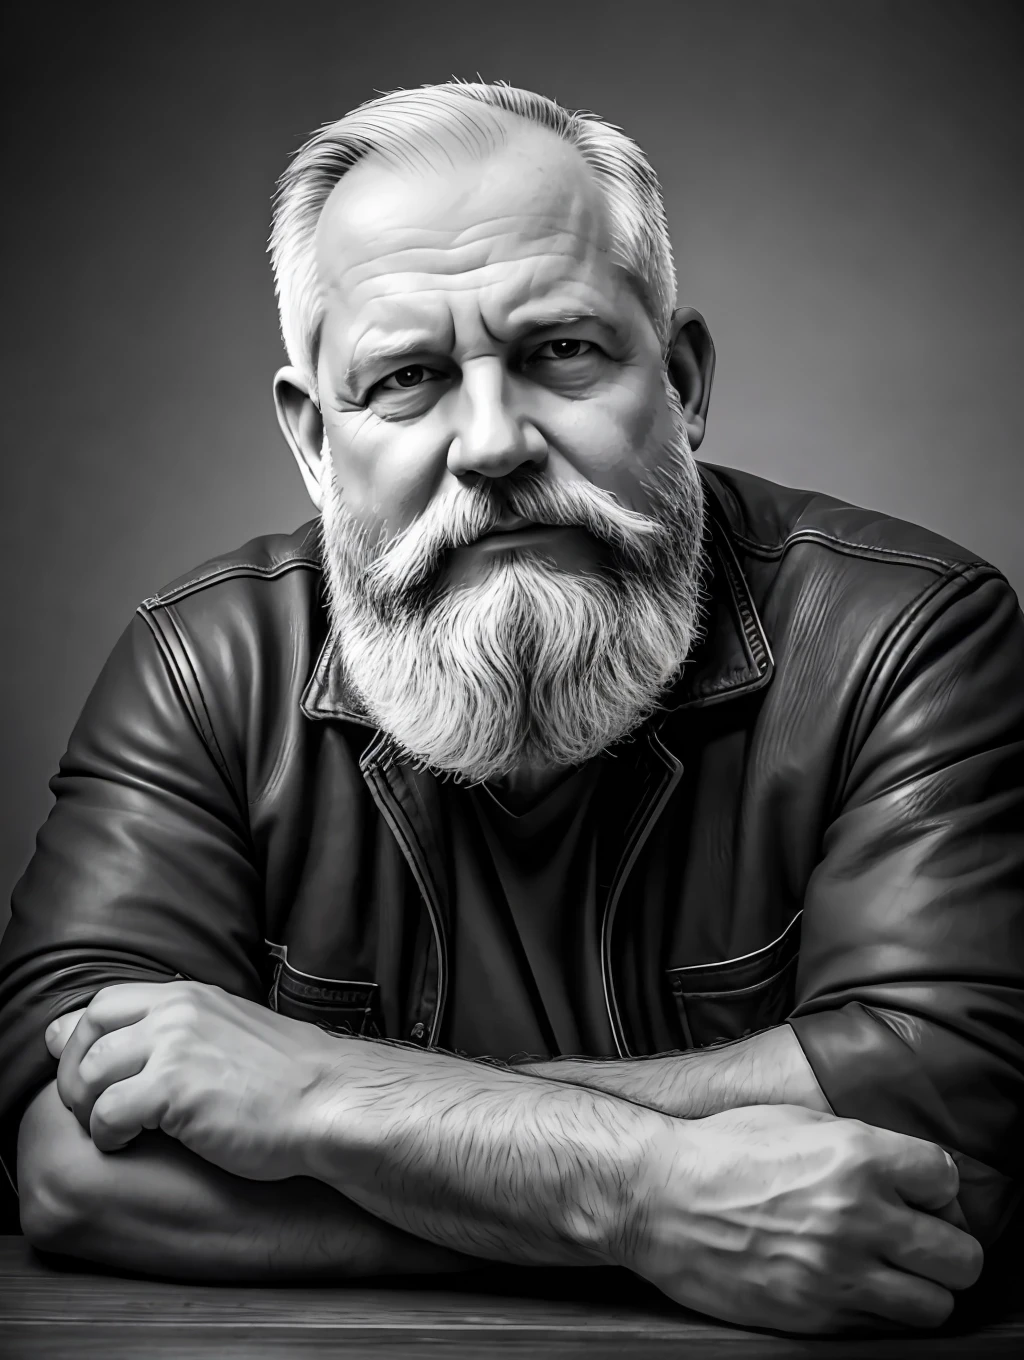 B&w portrait of a middle-aged man, detailed skin face, expression wrinkles, lumberjack style gray beard, raw beige leather jacket, white T-shirt without print, stiff countenance. Ultra detailed scene, dslr camera with 50mm Lens, soft studio lighting, ((vignette))